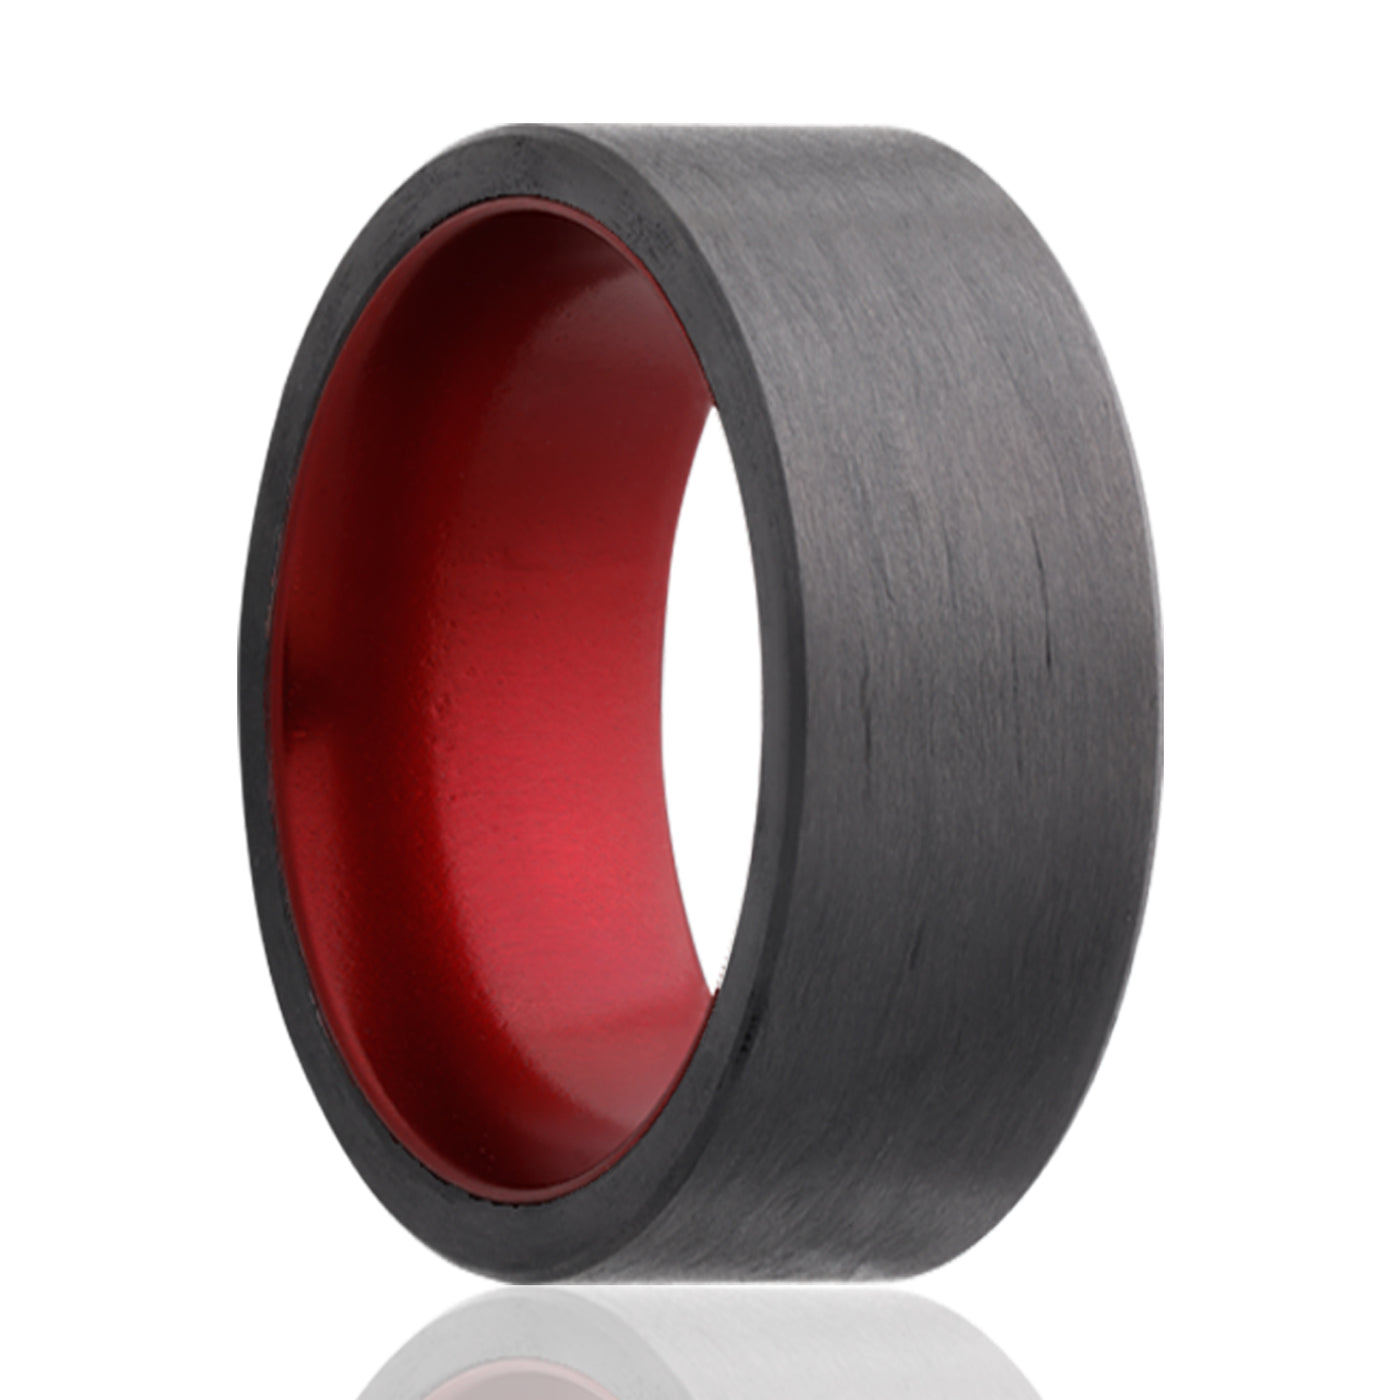 8mm Carbon Fiber pipe cut natural anodized sleeve ring